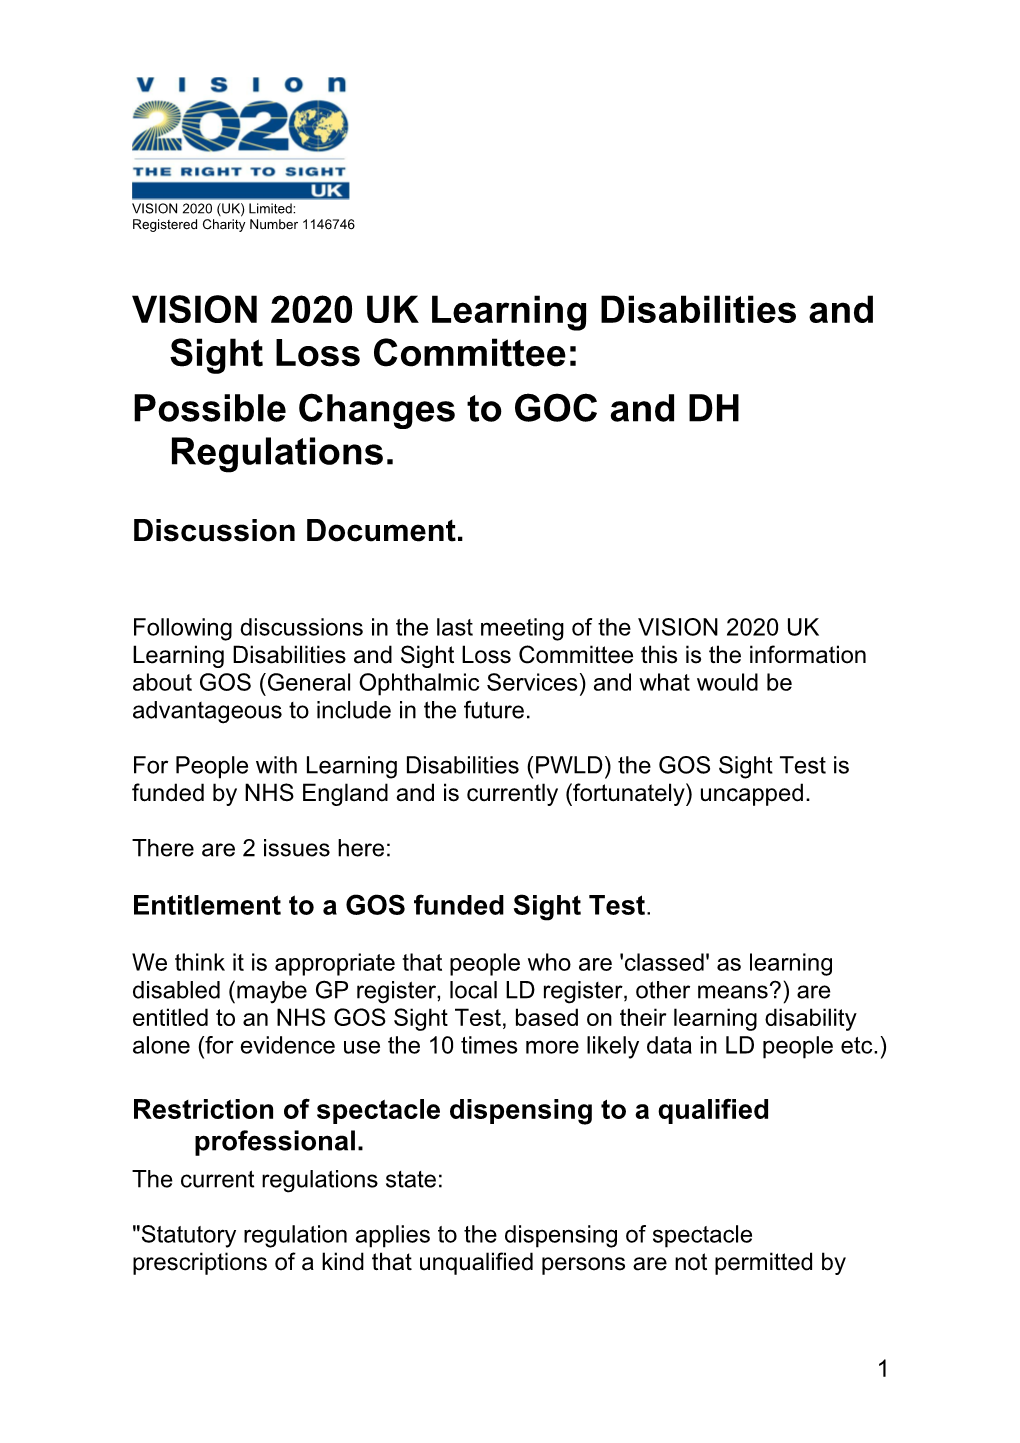 VISION 2020 UK Learning Disabilities and Sight Loss Committee